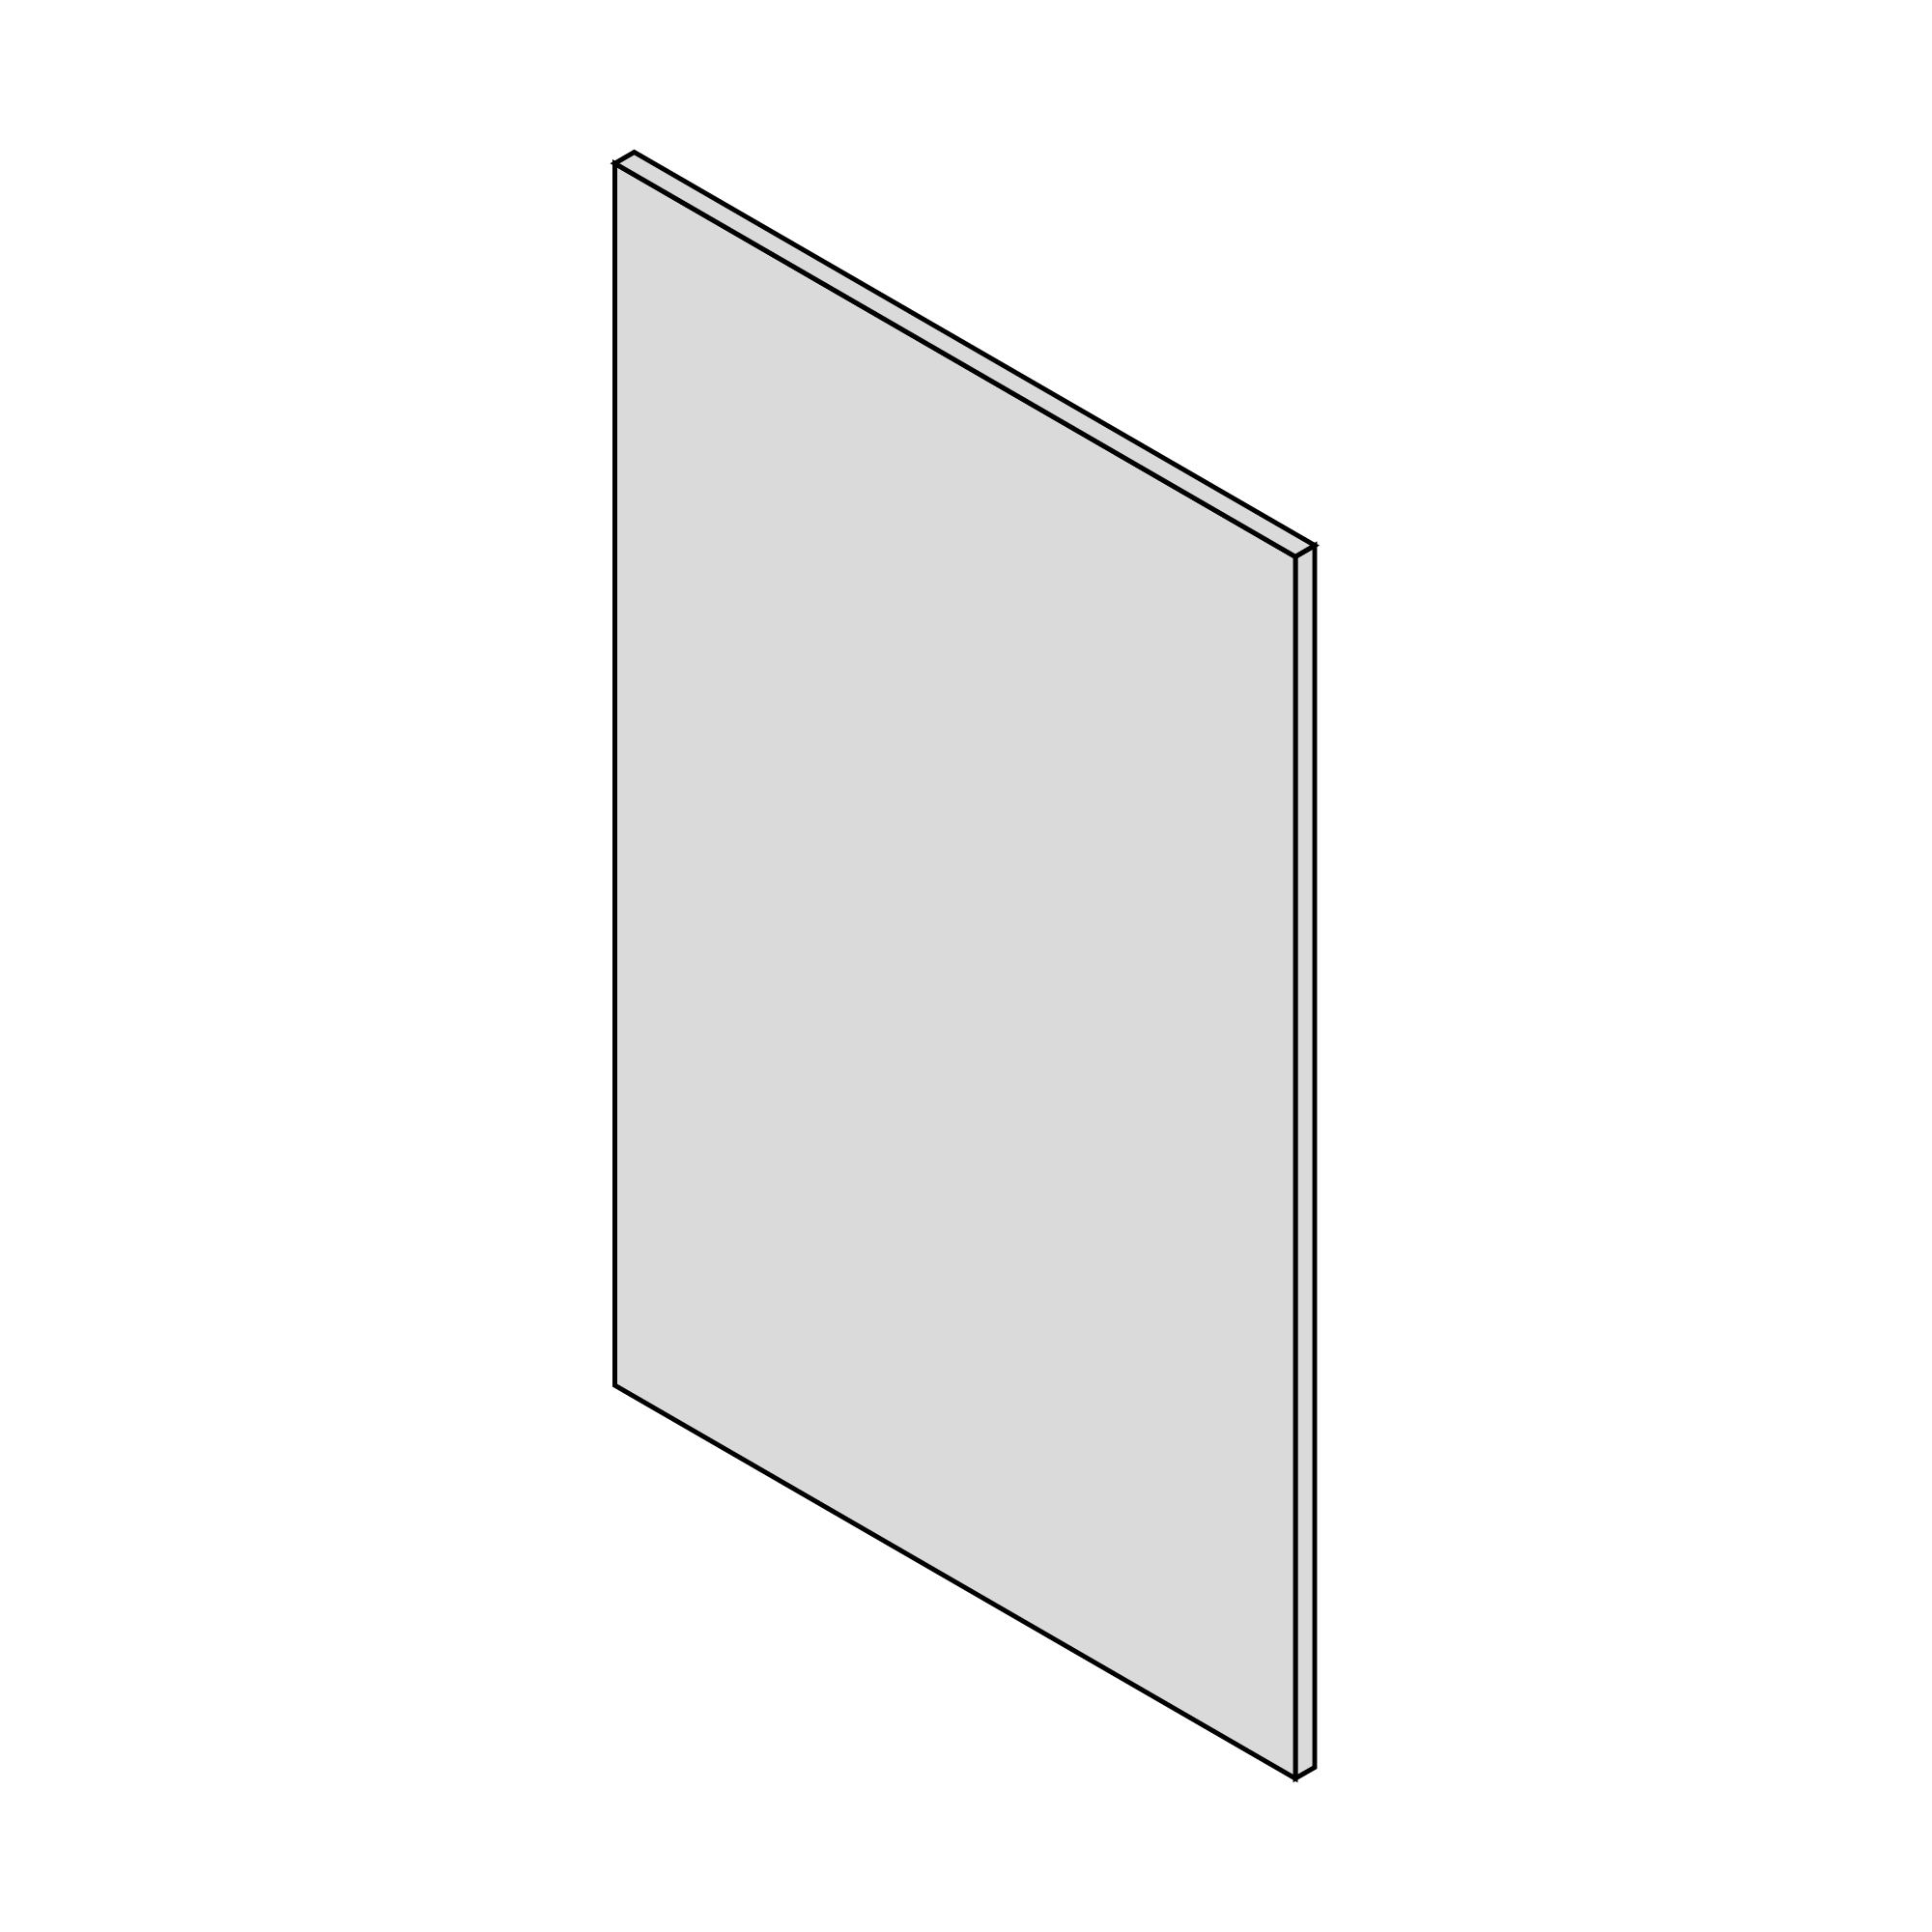 Diagram of a kitchen panel